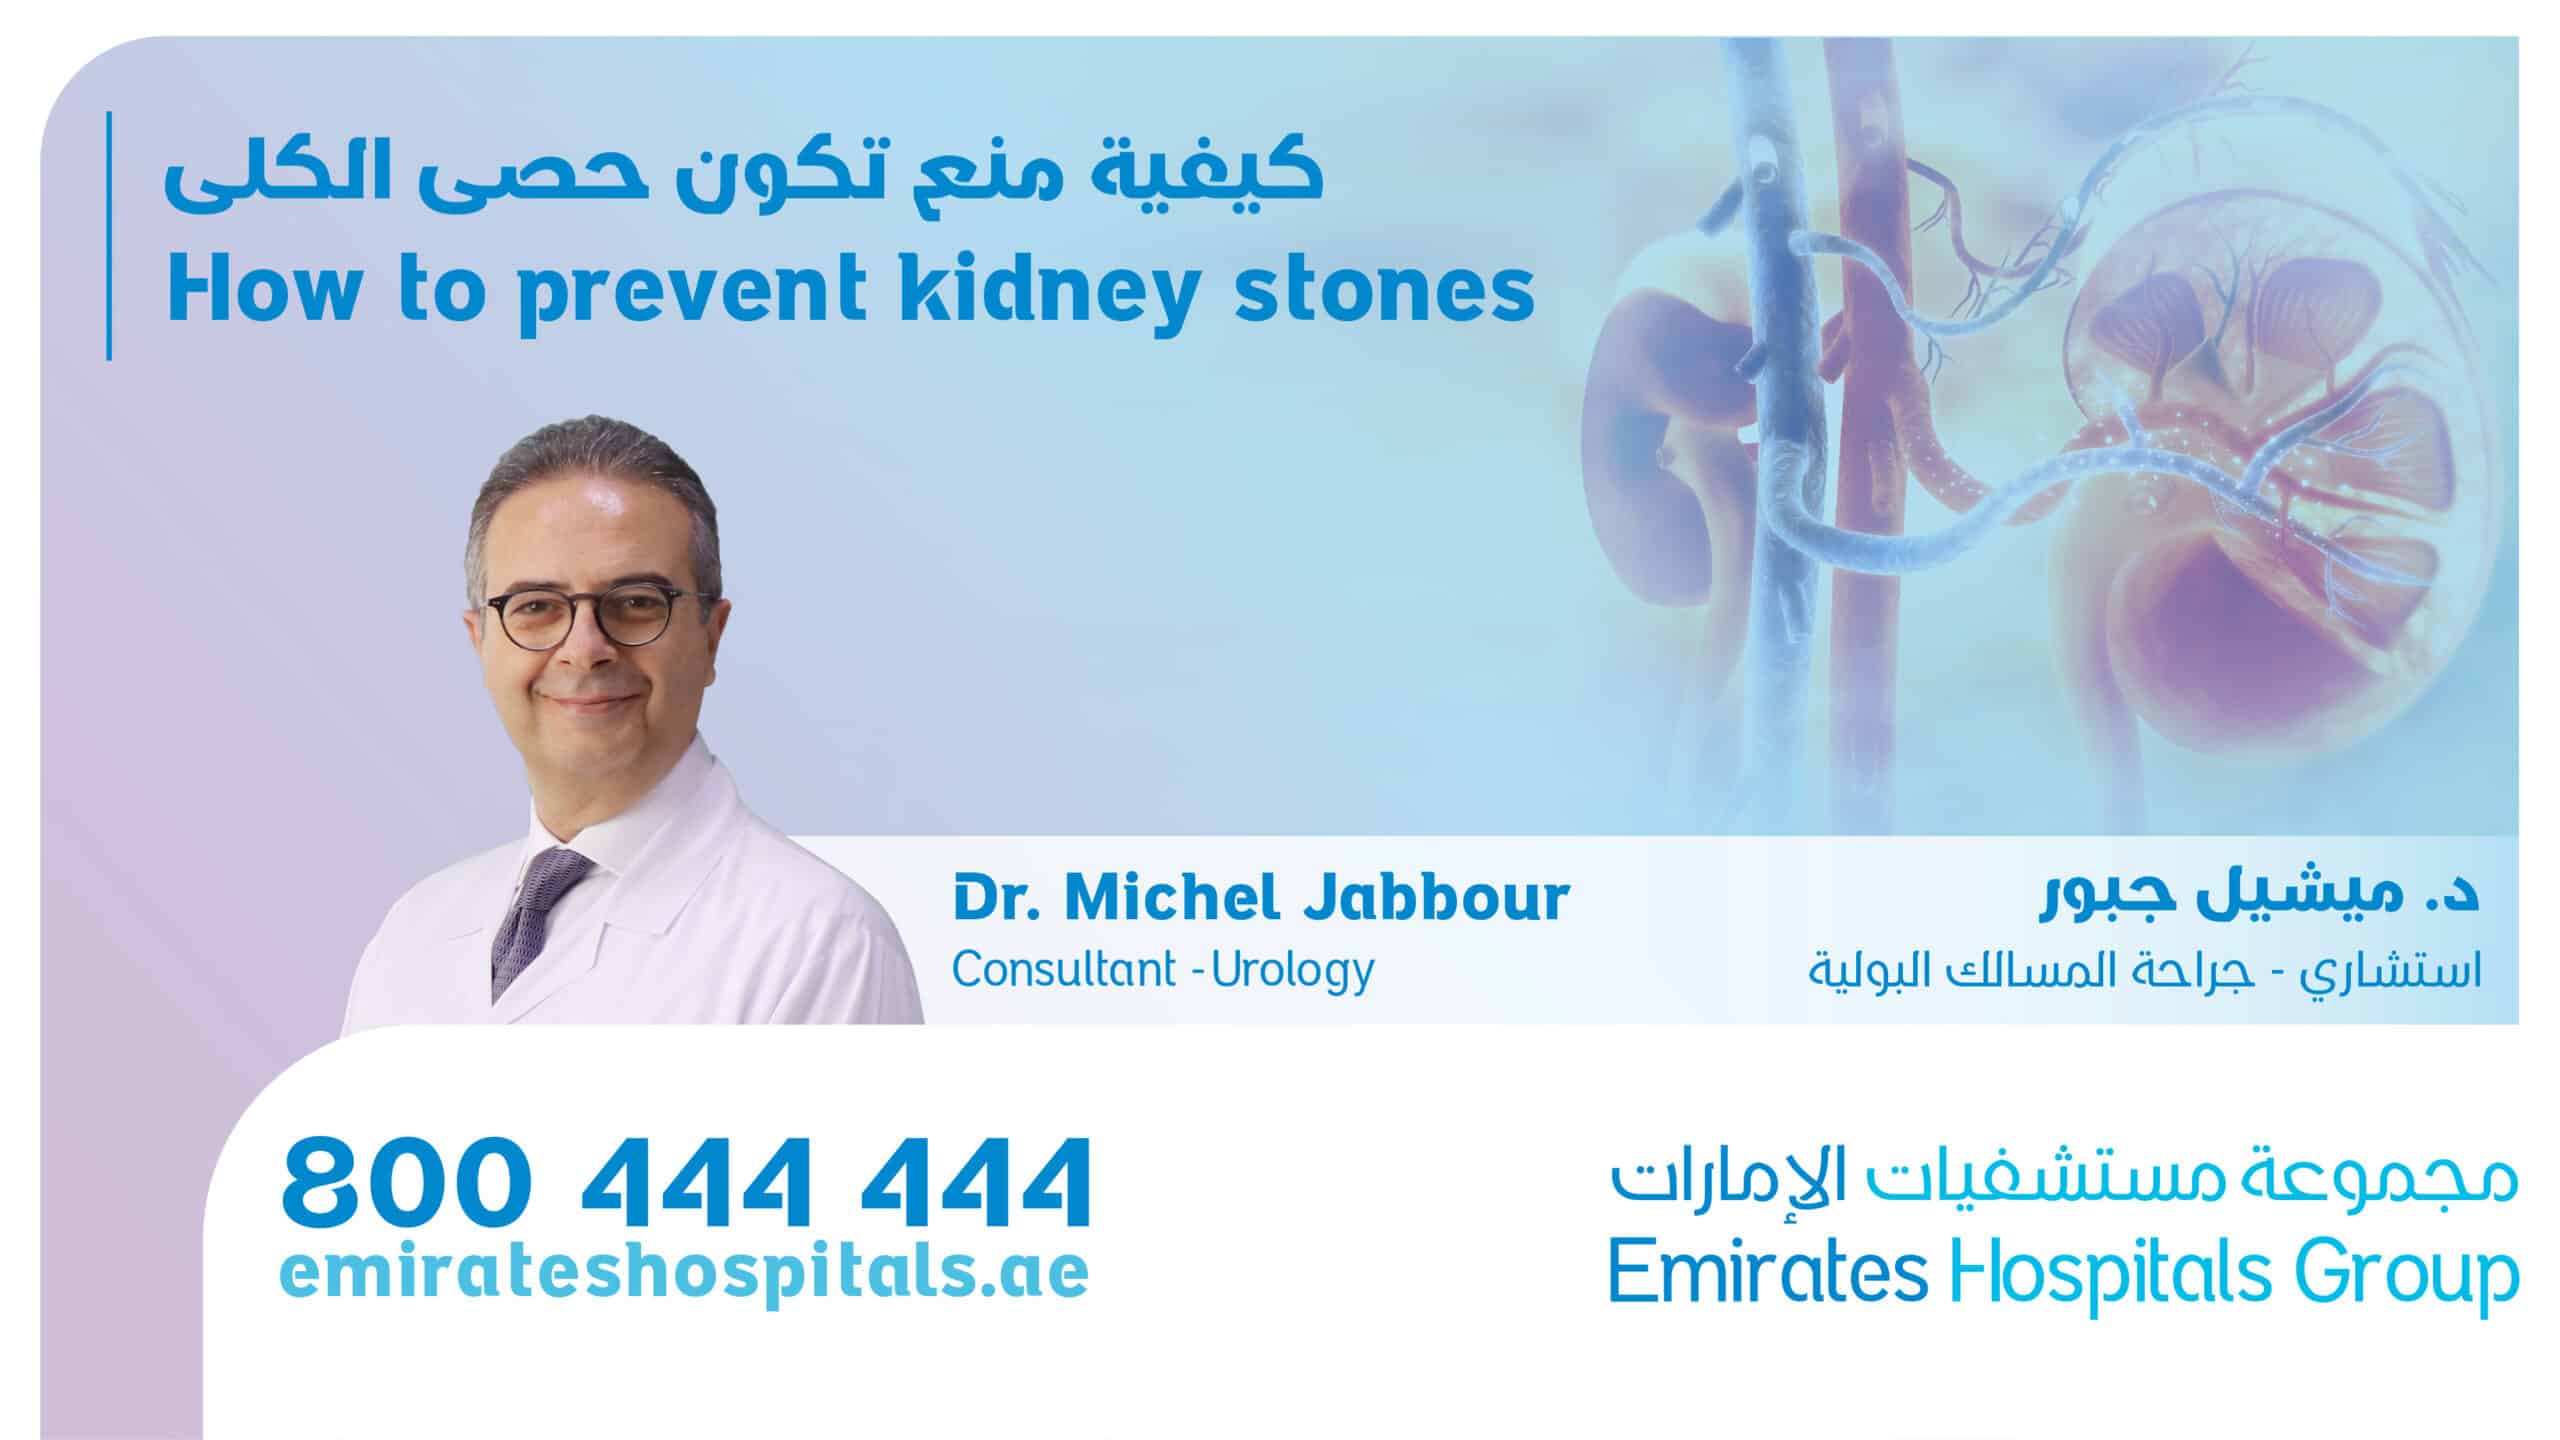 How To prevent Kidney Stones | Dr. Michel Jabbour , Consultant Urology